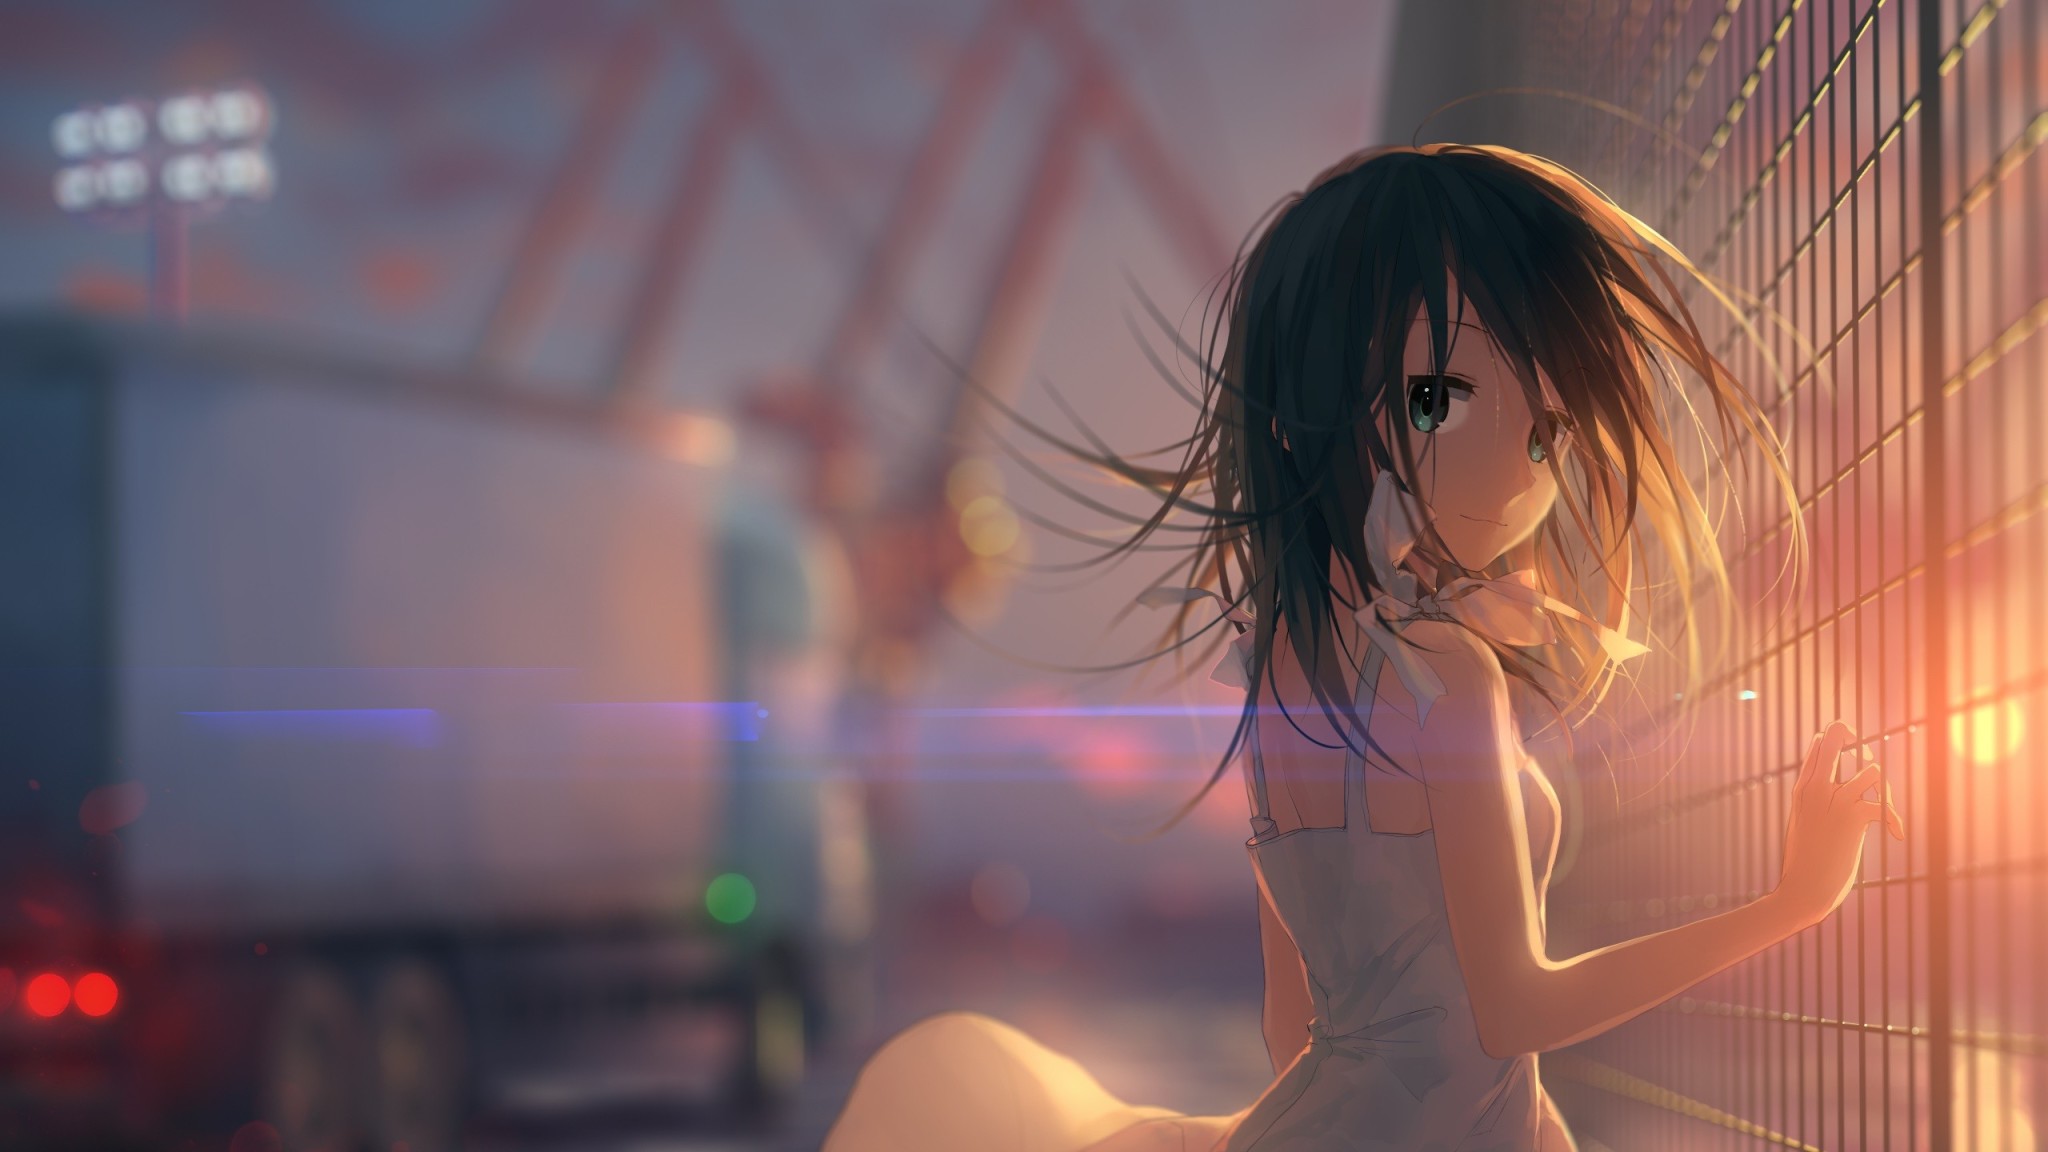 very cute wallpapers for mobile 240x320,beauty,cg artwork,photography,long hair,black hair